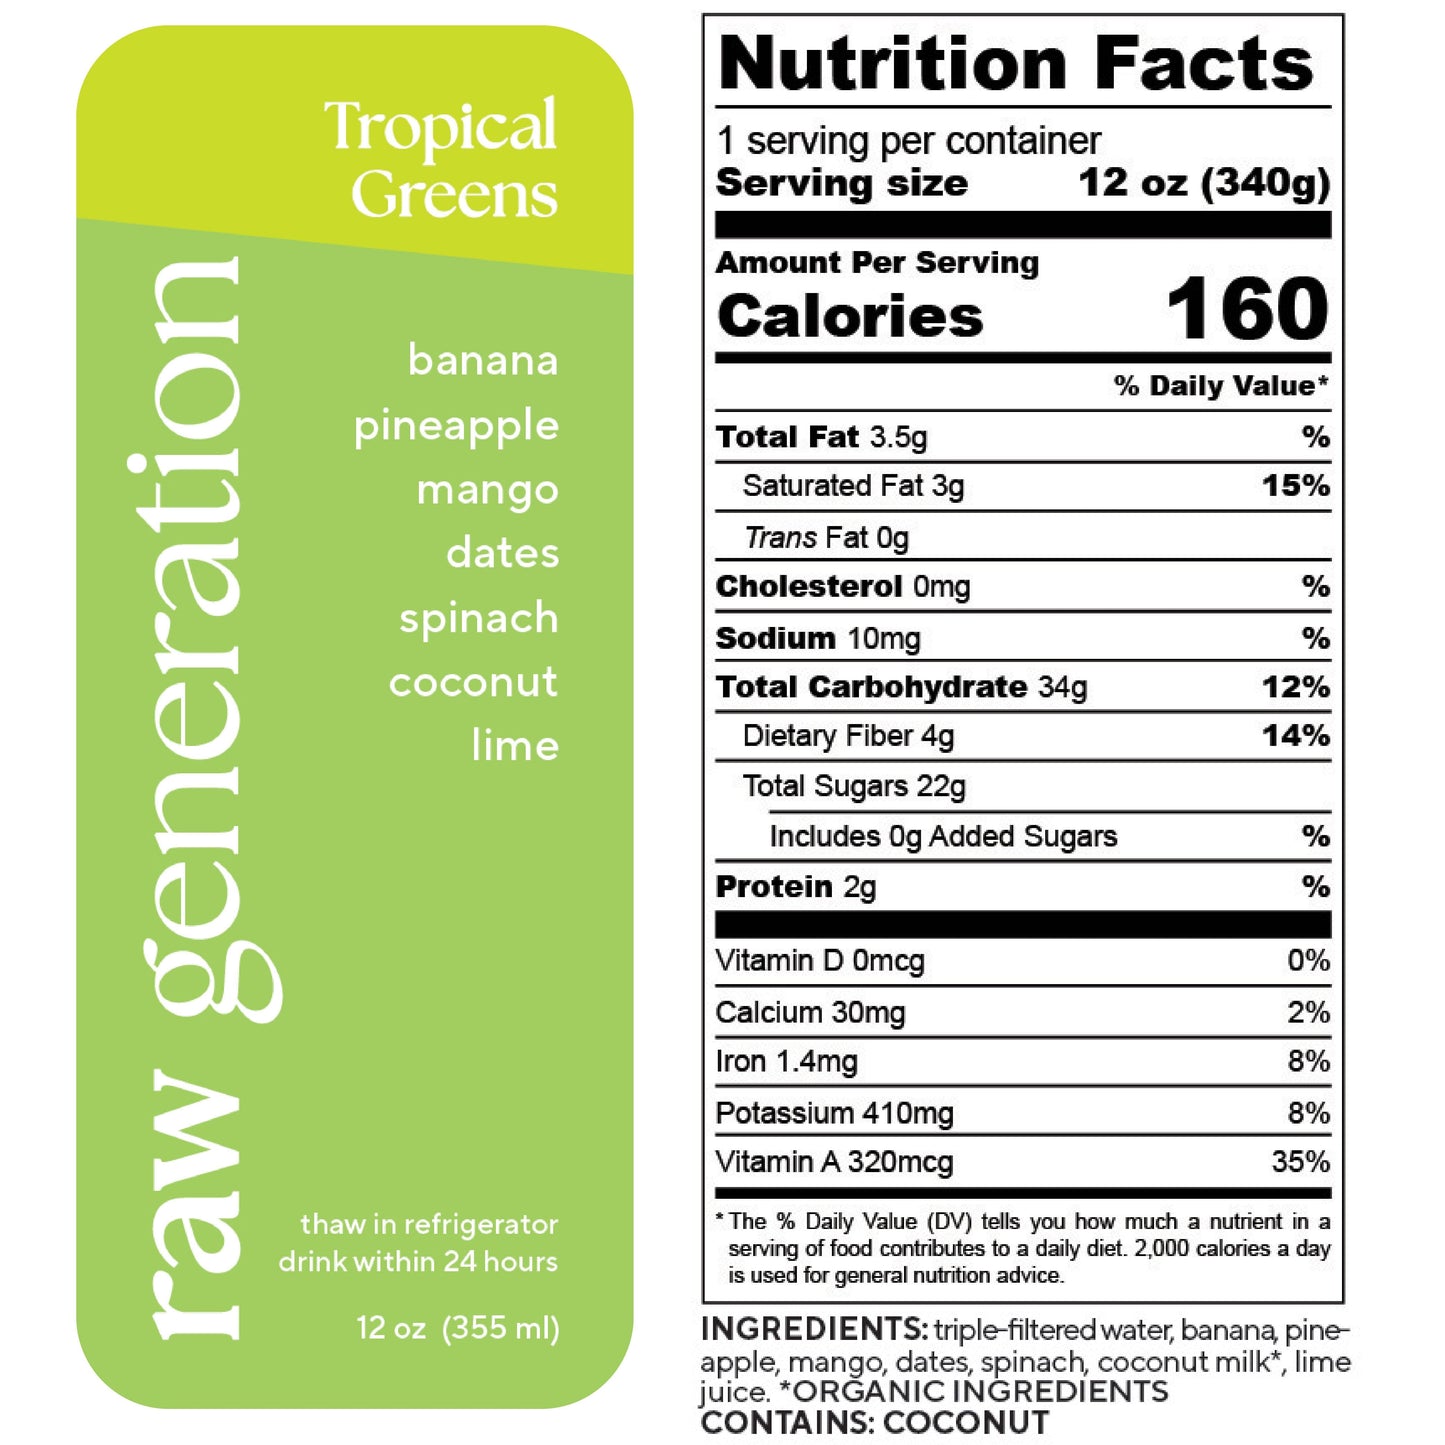 Nutrition Facts, 1 serving/container, Serving size 12 oz (340g), Calories 160, Total Fat 3.5g, Saturated Fat 3g, Trans Fat 0g, Cholesterol 0mg, Sodium 10mg, Total Carbohydrate 34g, Dietary Fiber 4g, Total Sugars 22g, Added Sugars 0g, Protein 2g, Vitamin D 0mcg, Calcium 30mg, Iron 1.4mg, Potassium 410mg, Vitamin A 320mcg; Ingredients used: triple-filtered water, banana, pineapple, mango, dates, spinach, organic coconut milk, lime juice. Contains: COCONUT.